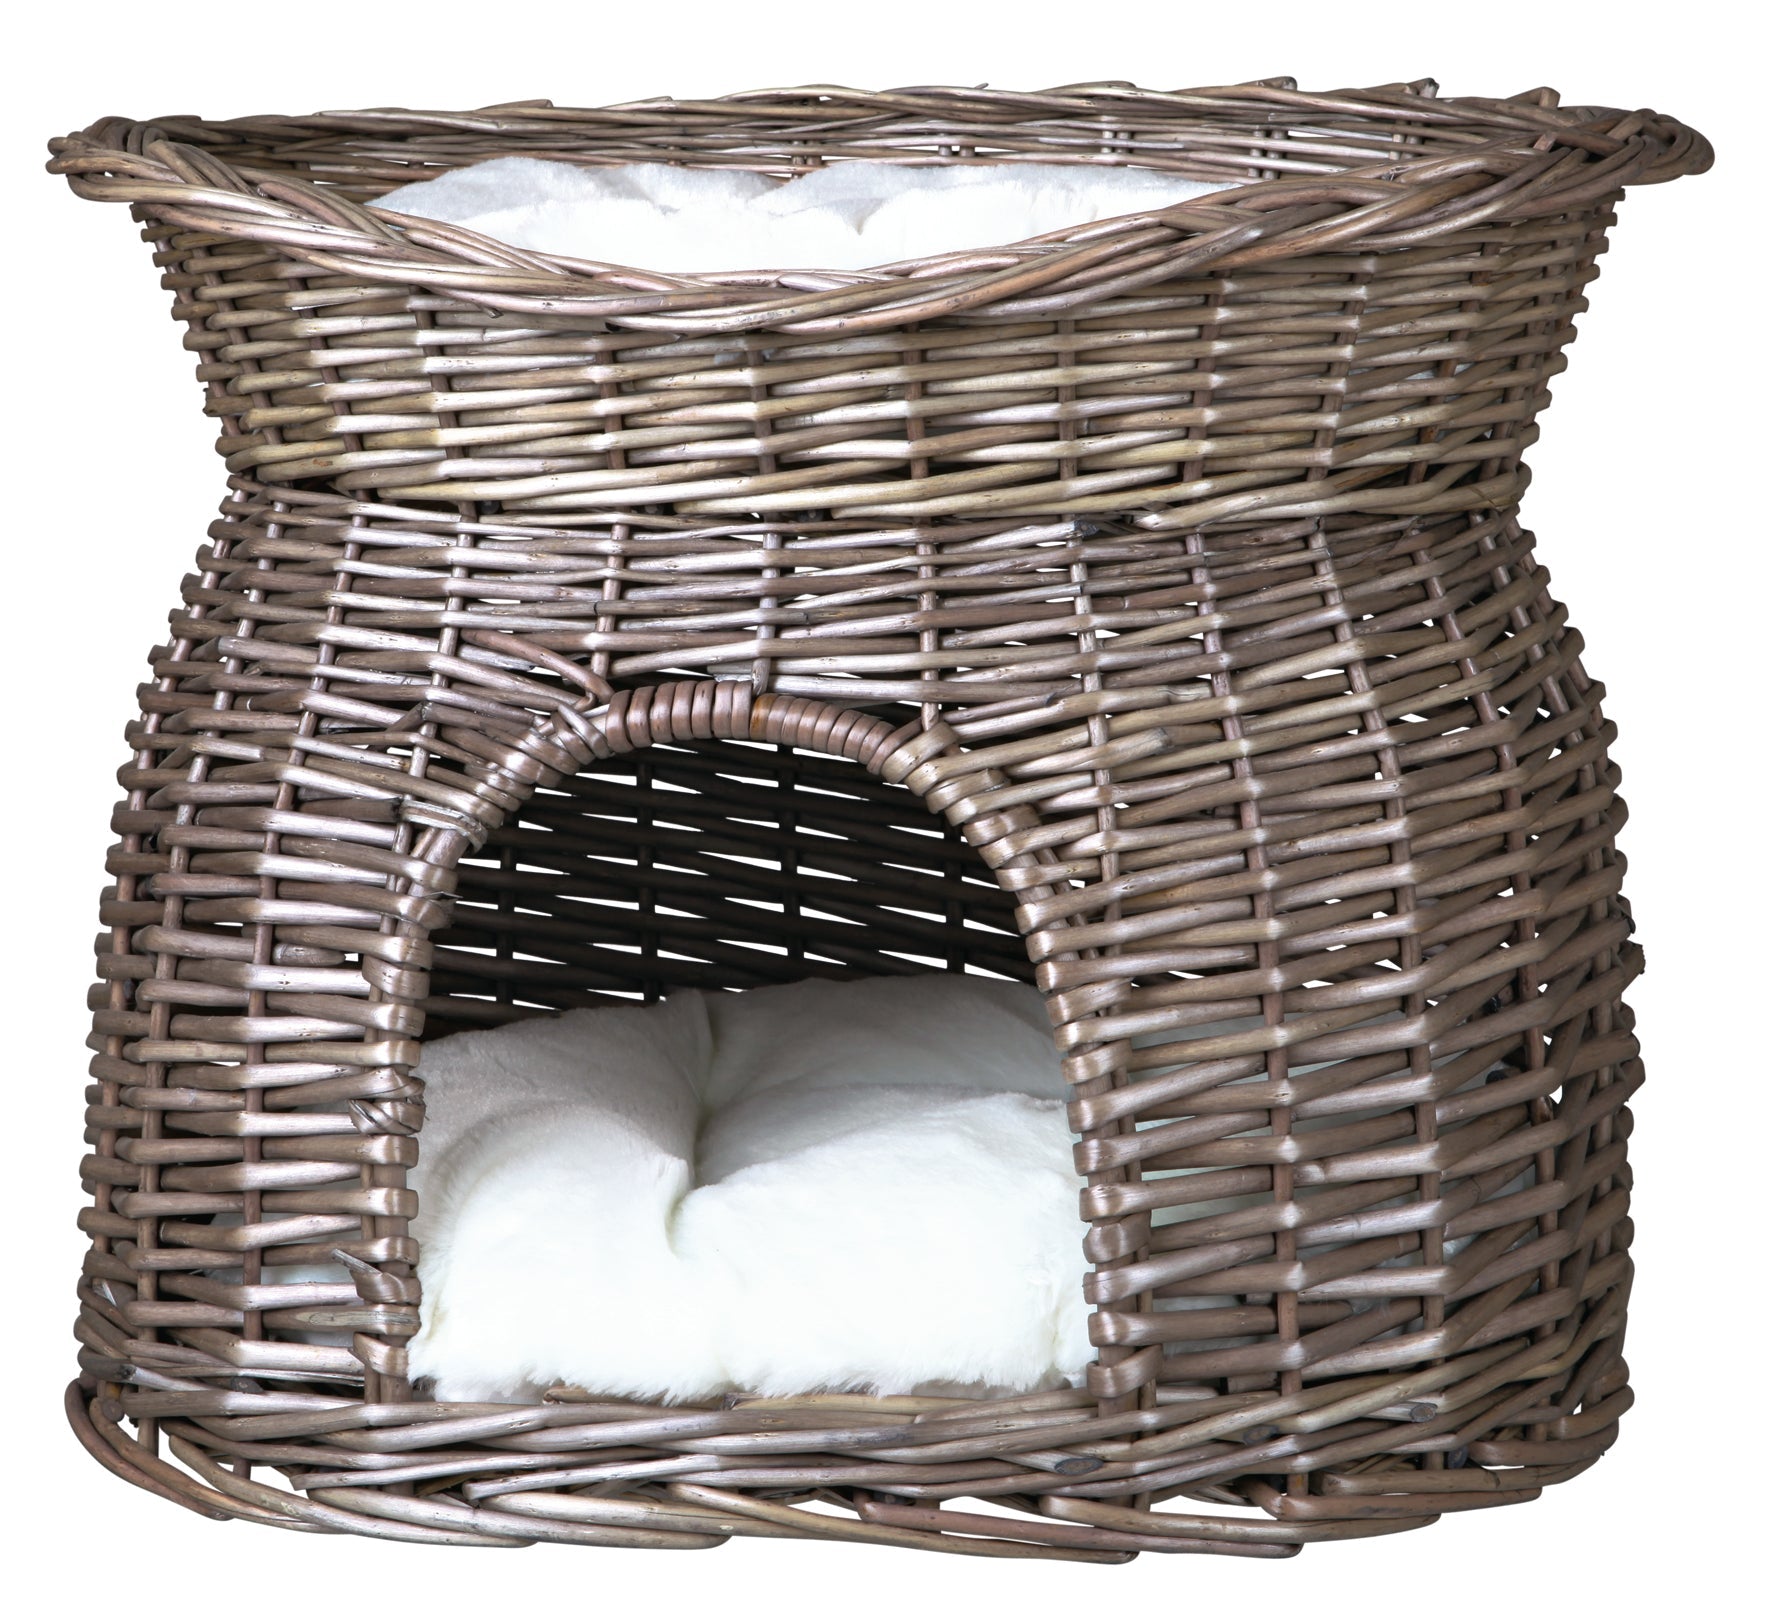 Trixie Wicker Cave with Bed on Top, 54 × 43 × 37 cm, Grey - Petsgool Online